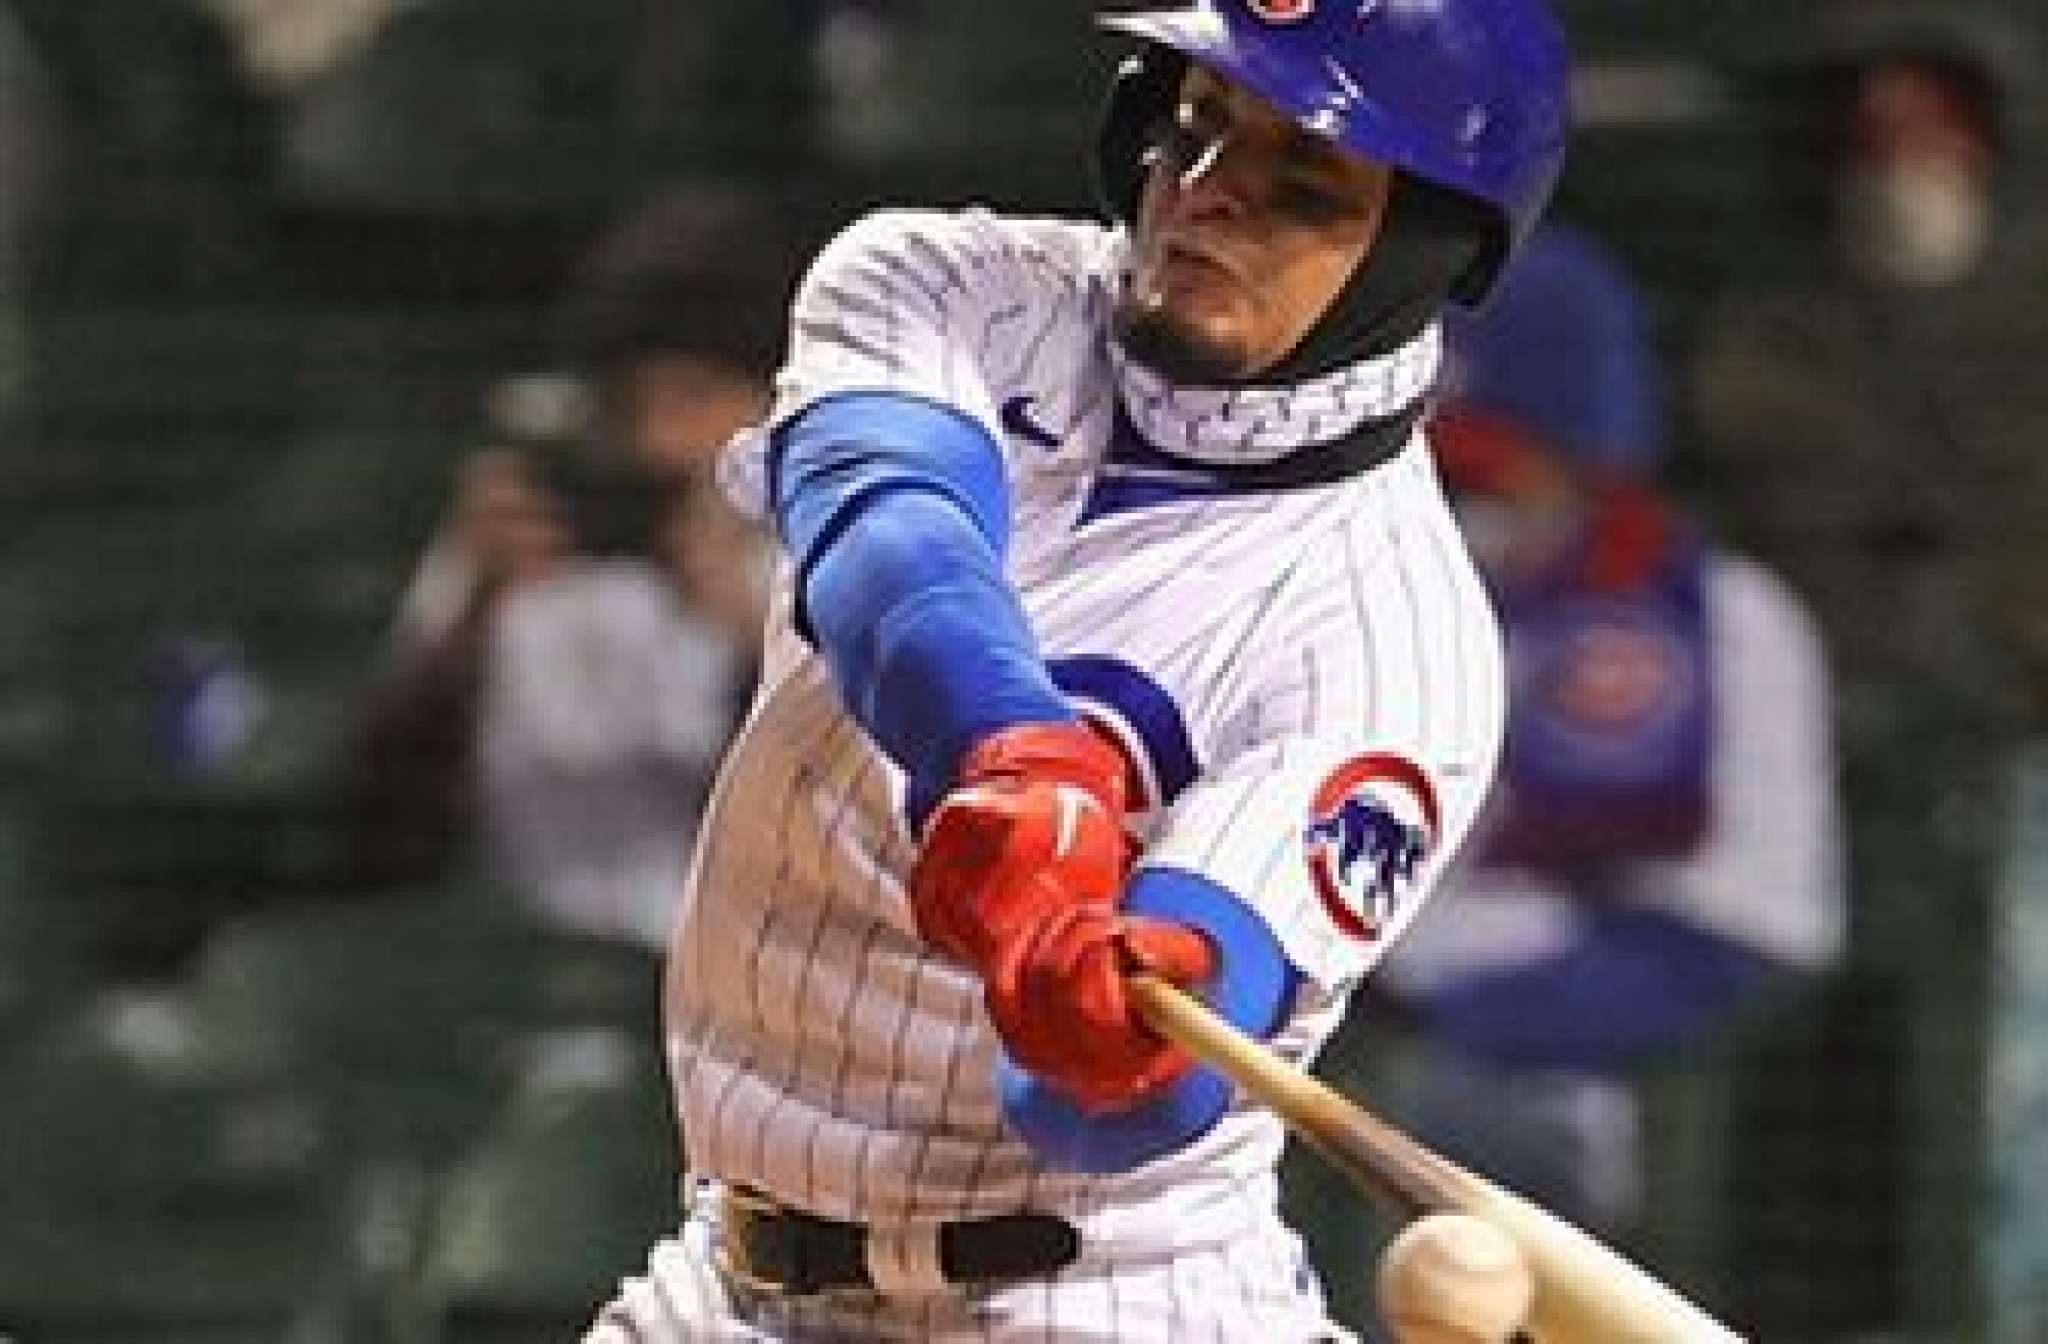 Javier Báez turns around and bats lefty in Cubs’ 16-4 blowout win over Mets